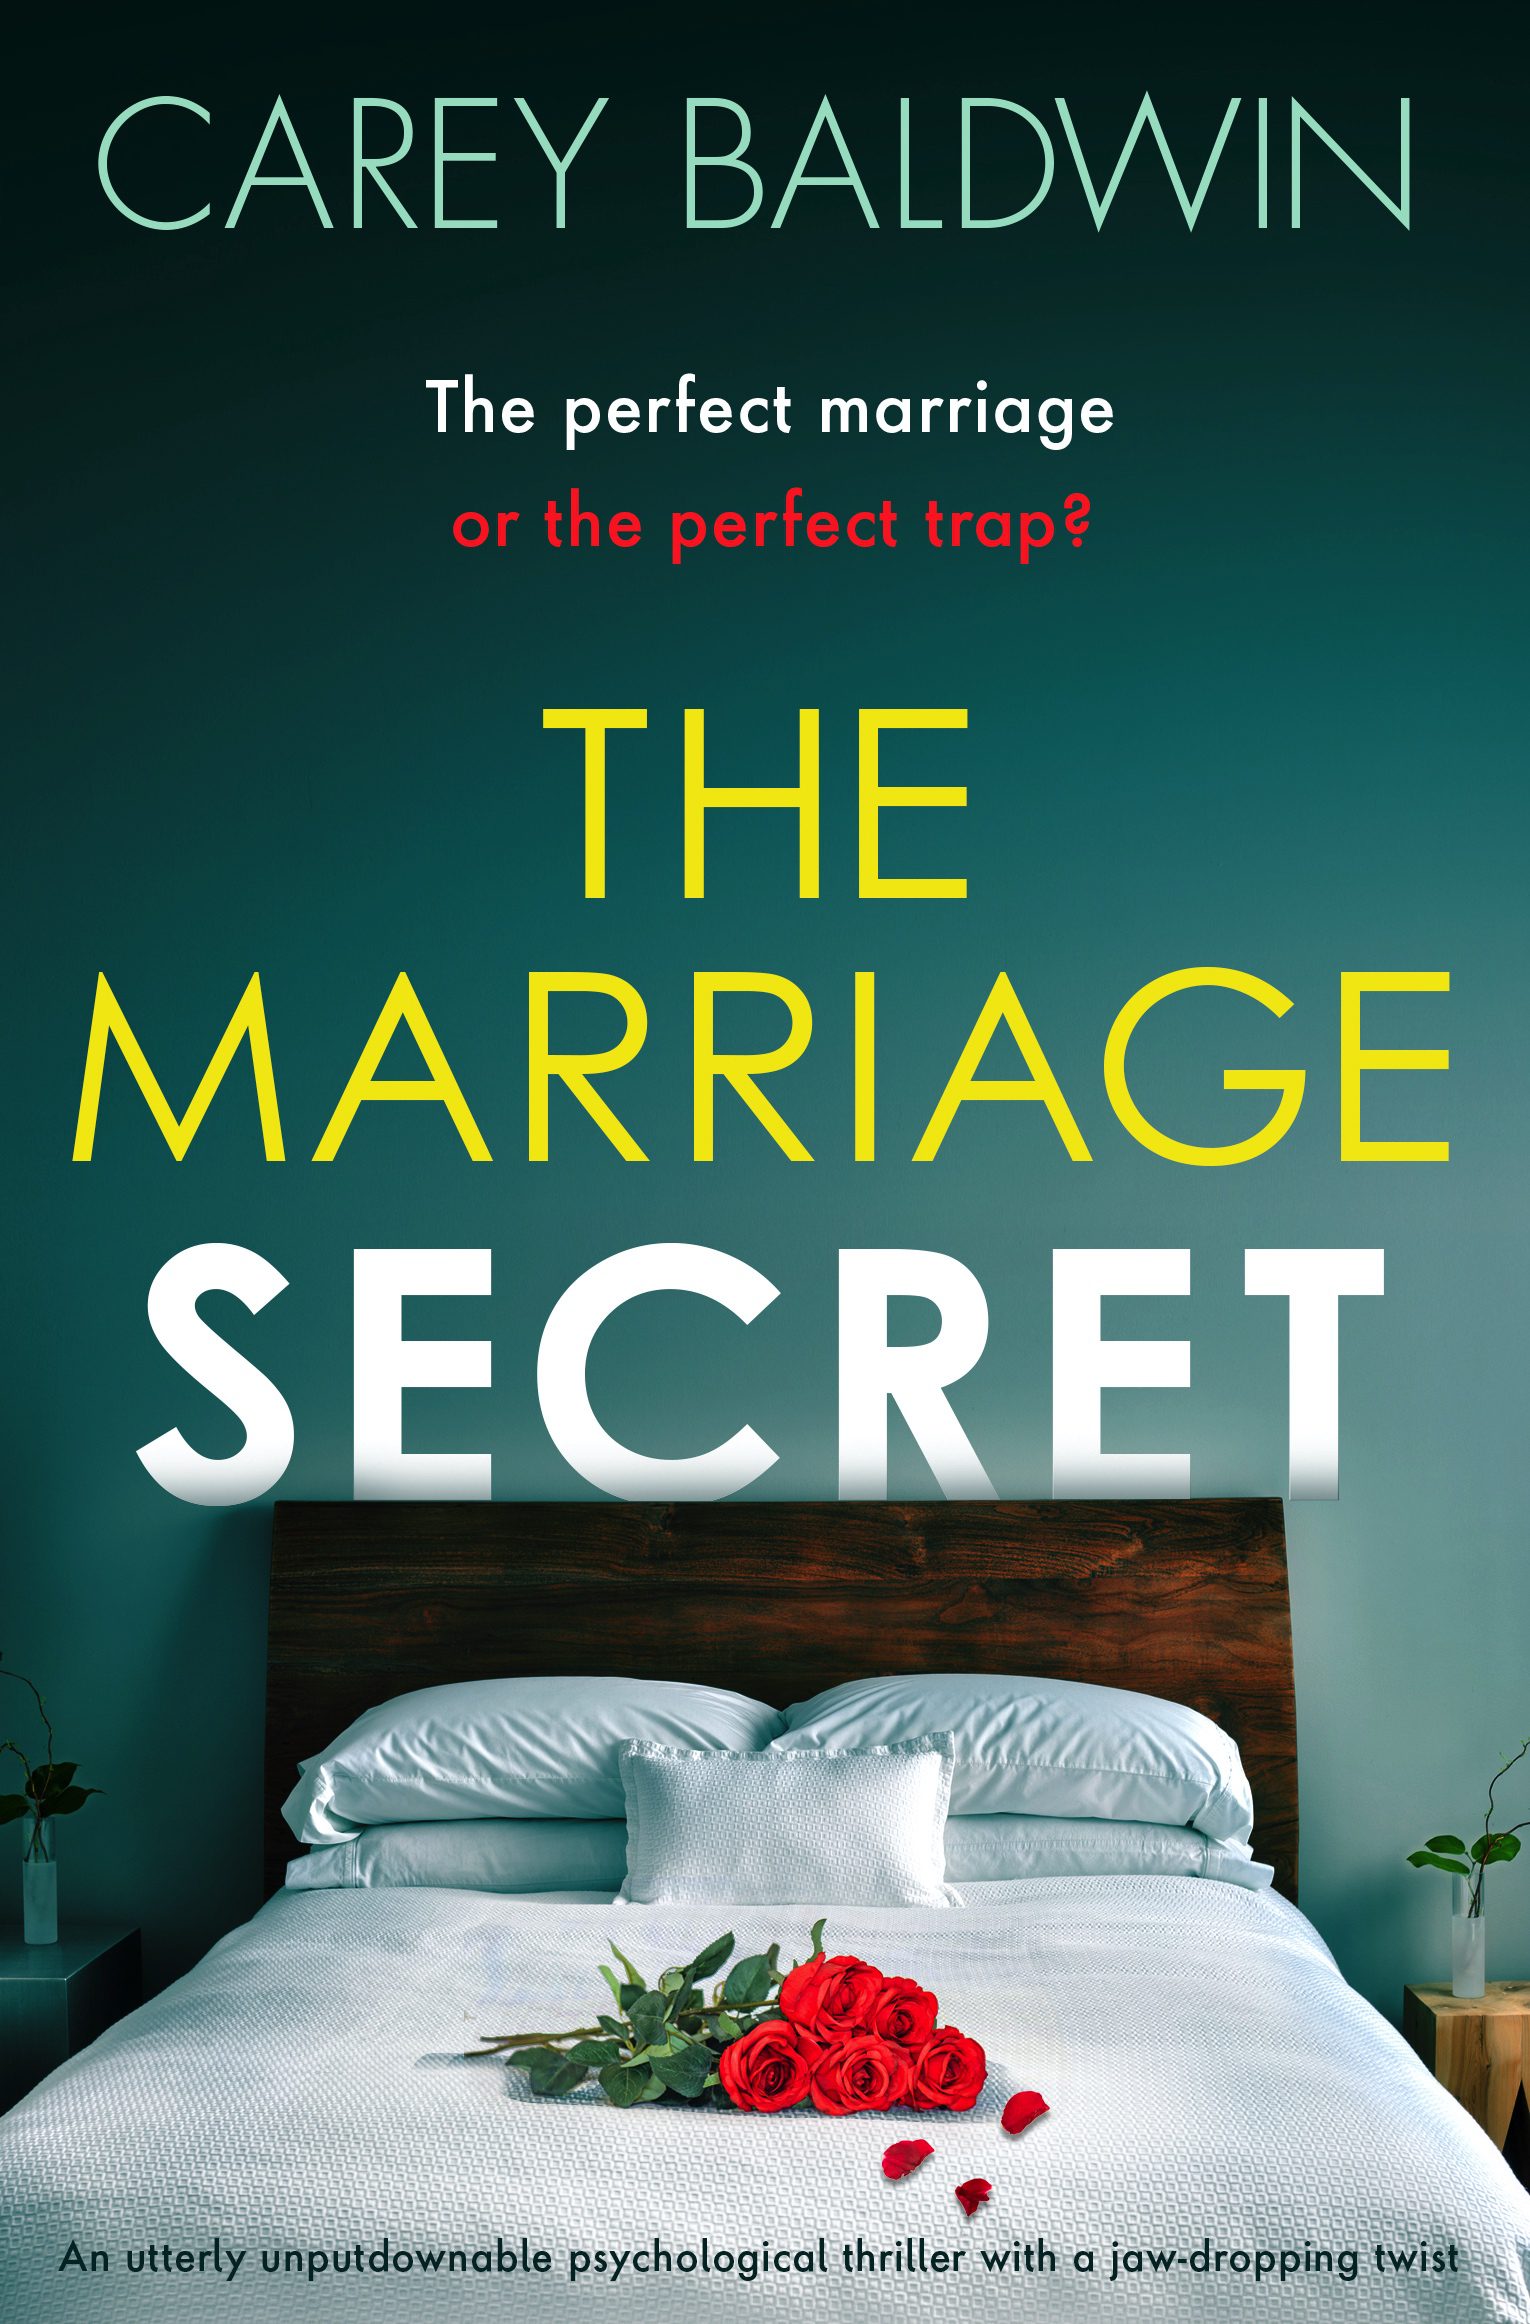 The Marriage Secret book cover